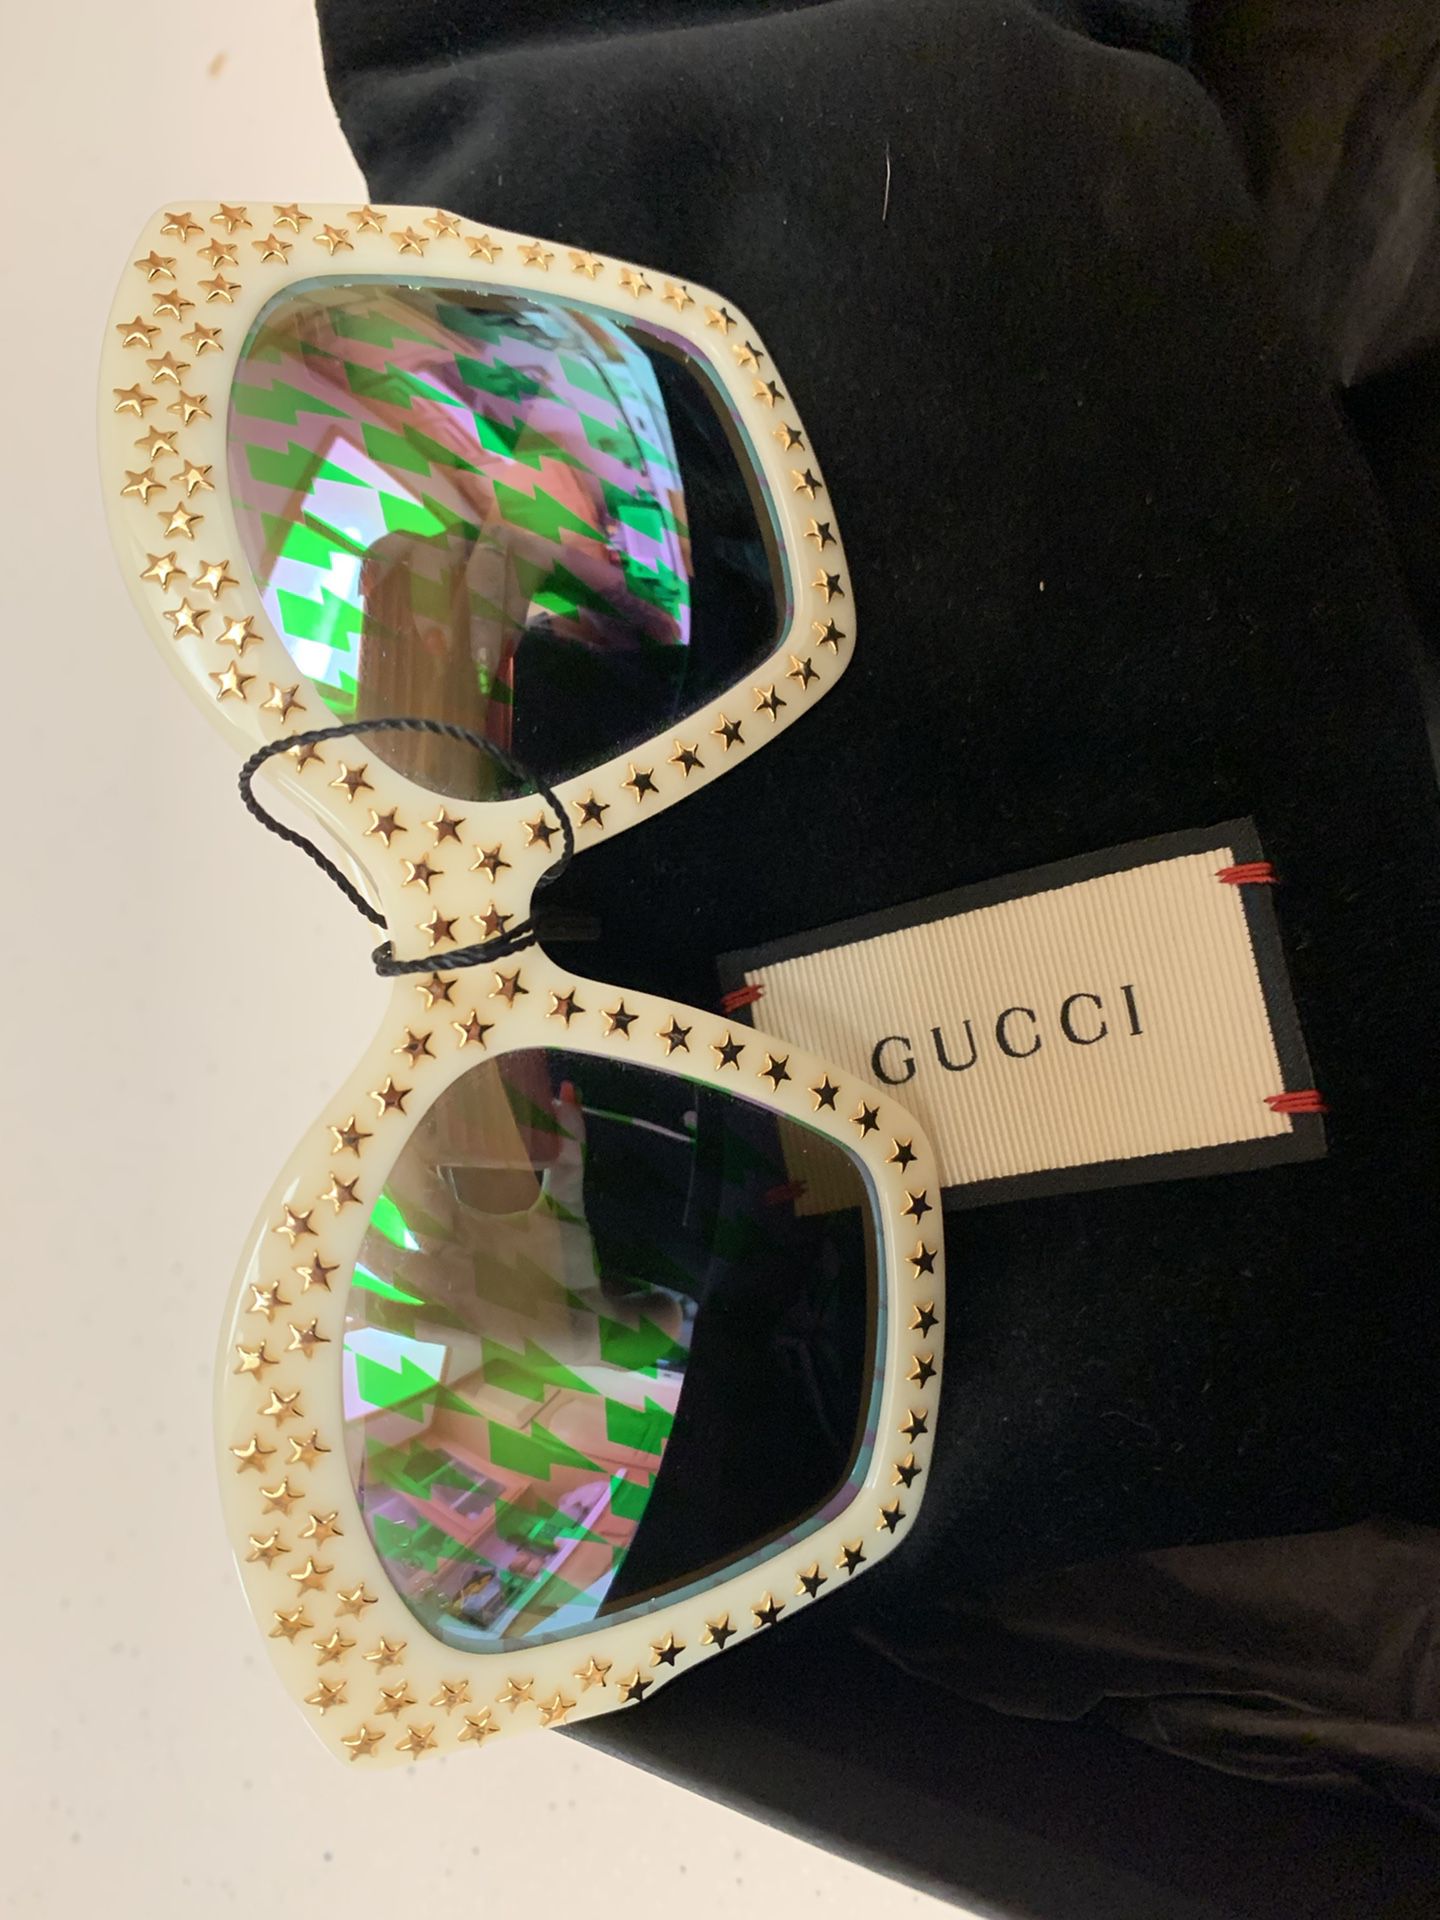 Authentic Gucci Sunglasses with receipt and tags